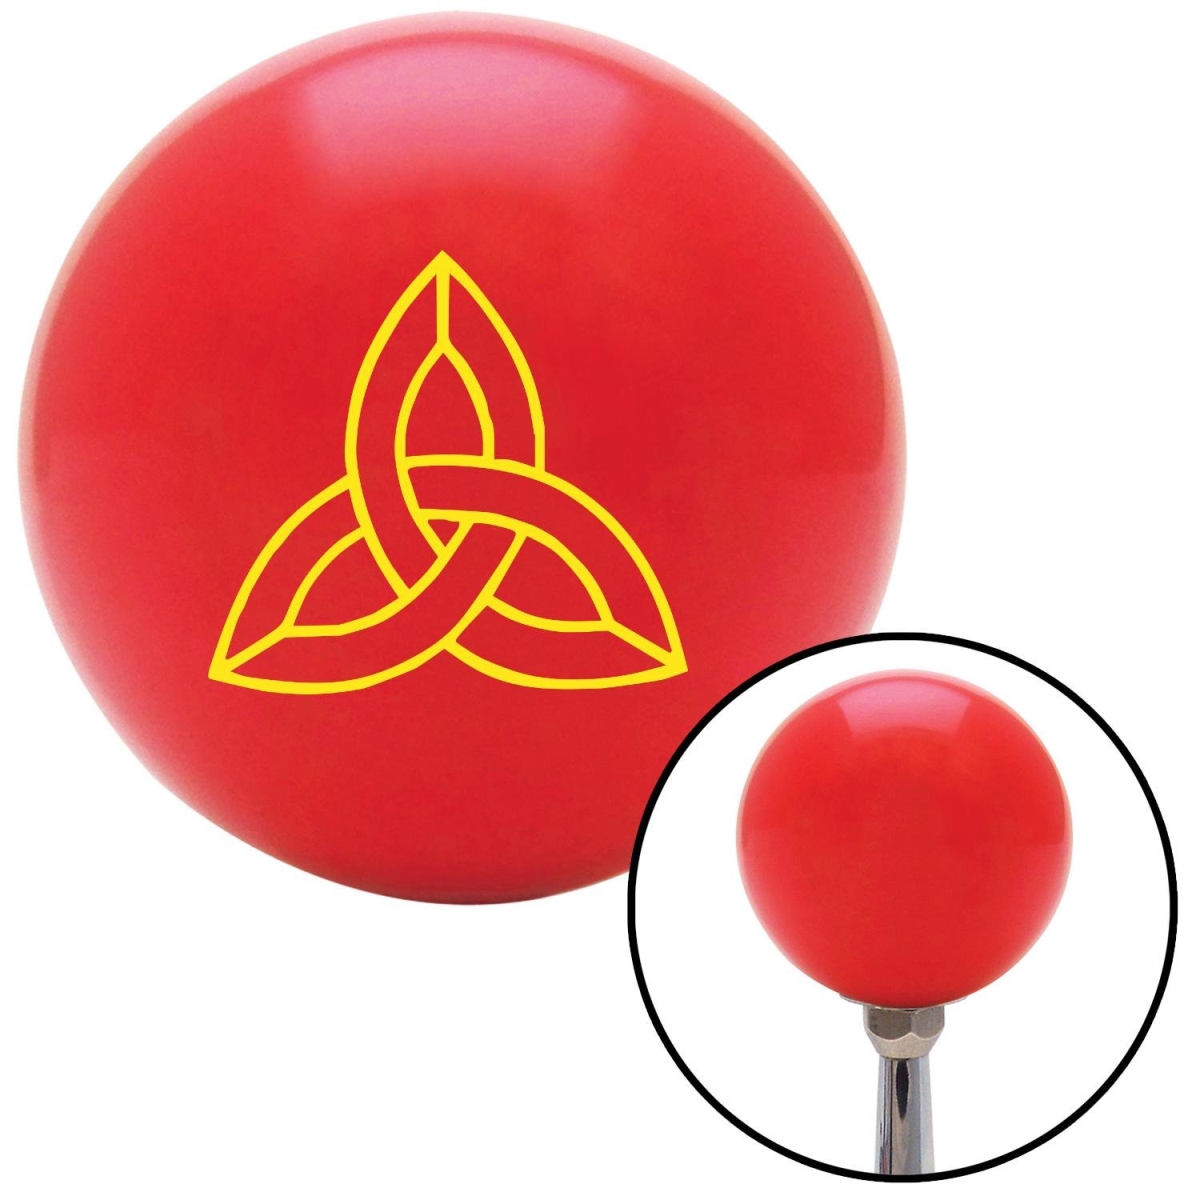 Picture of American Shifter 101578 Yellow Celtic Design No.1 Red Shift Knob with M16 x 1.5 Insert Shifter Auto Manual